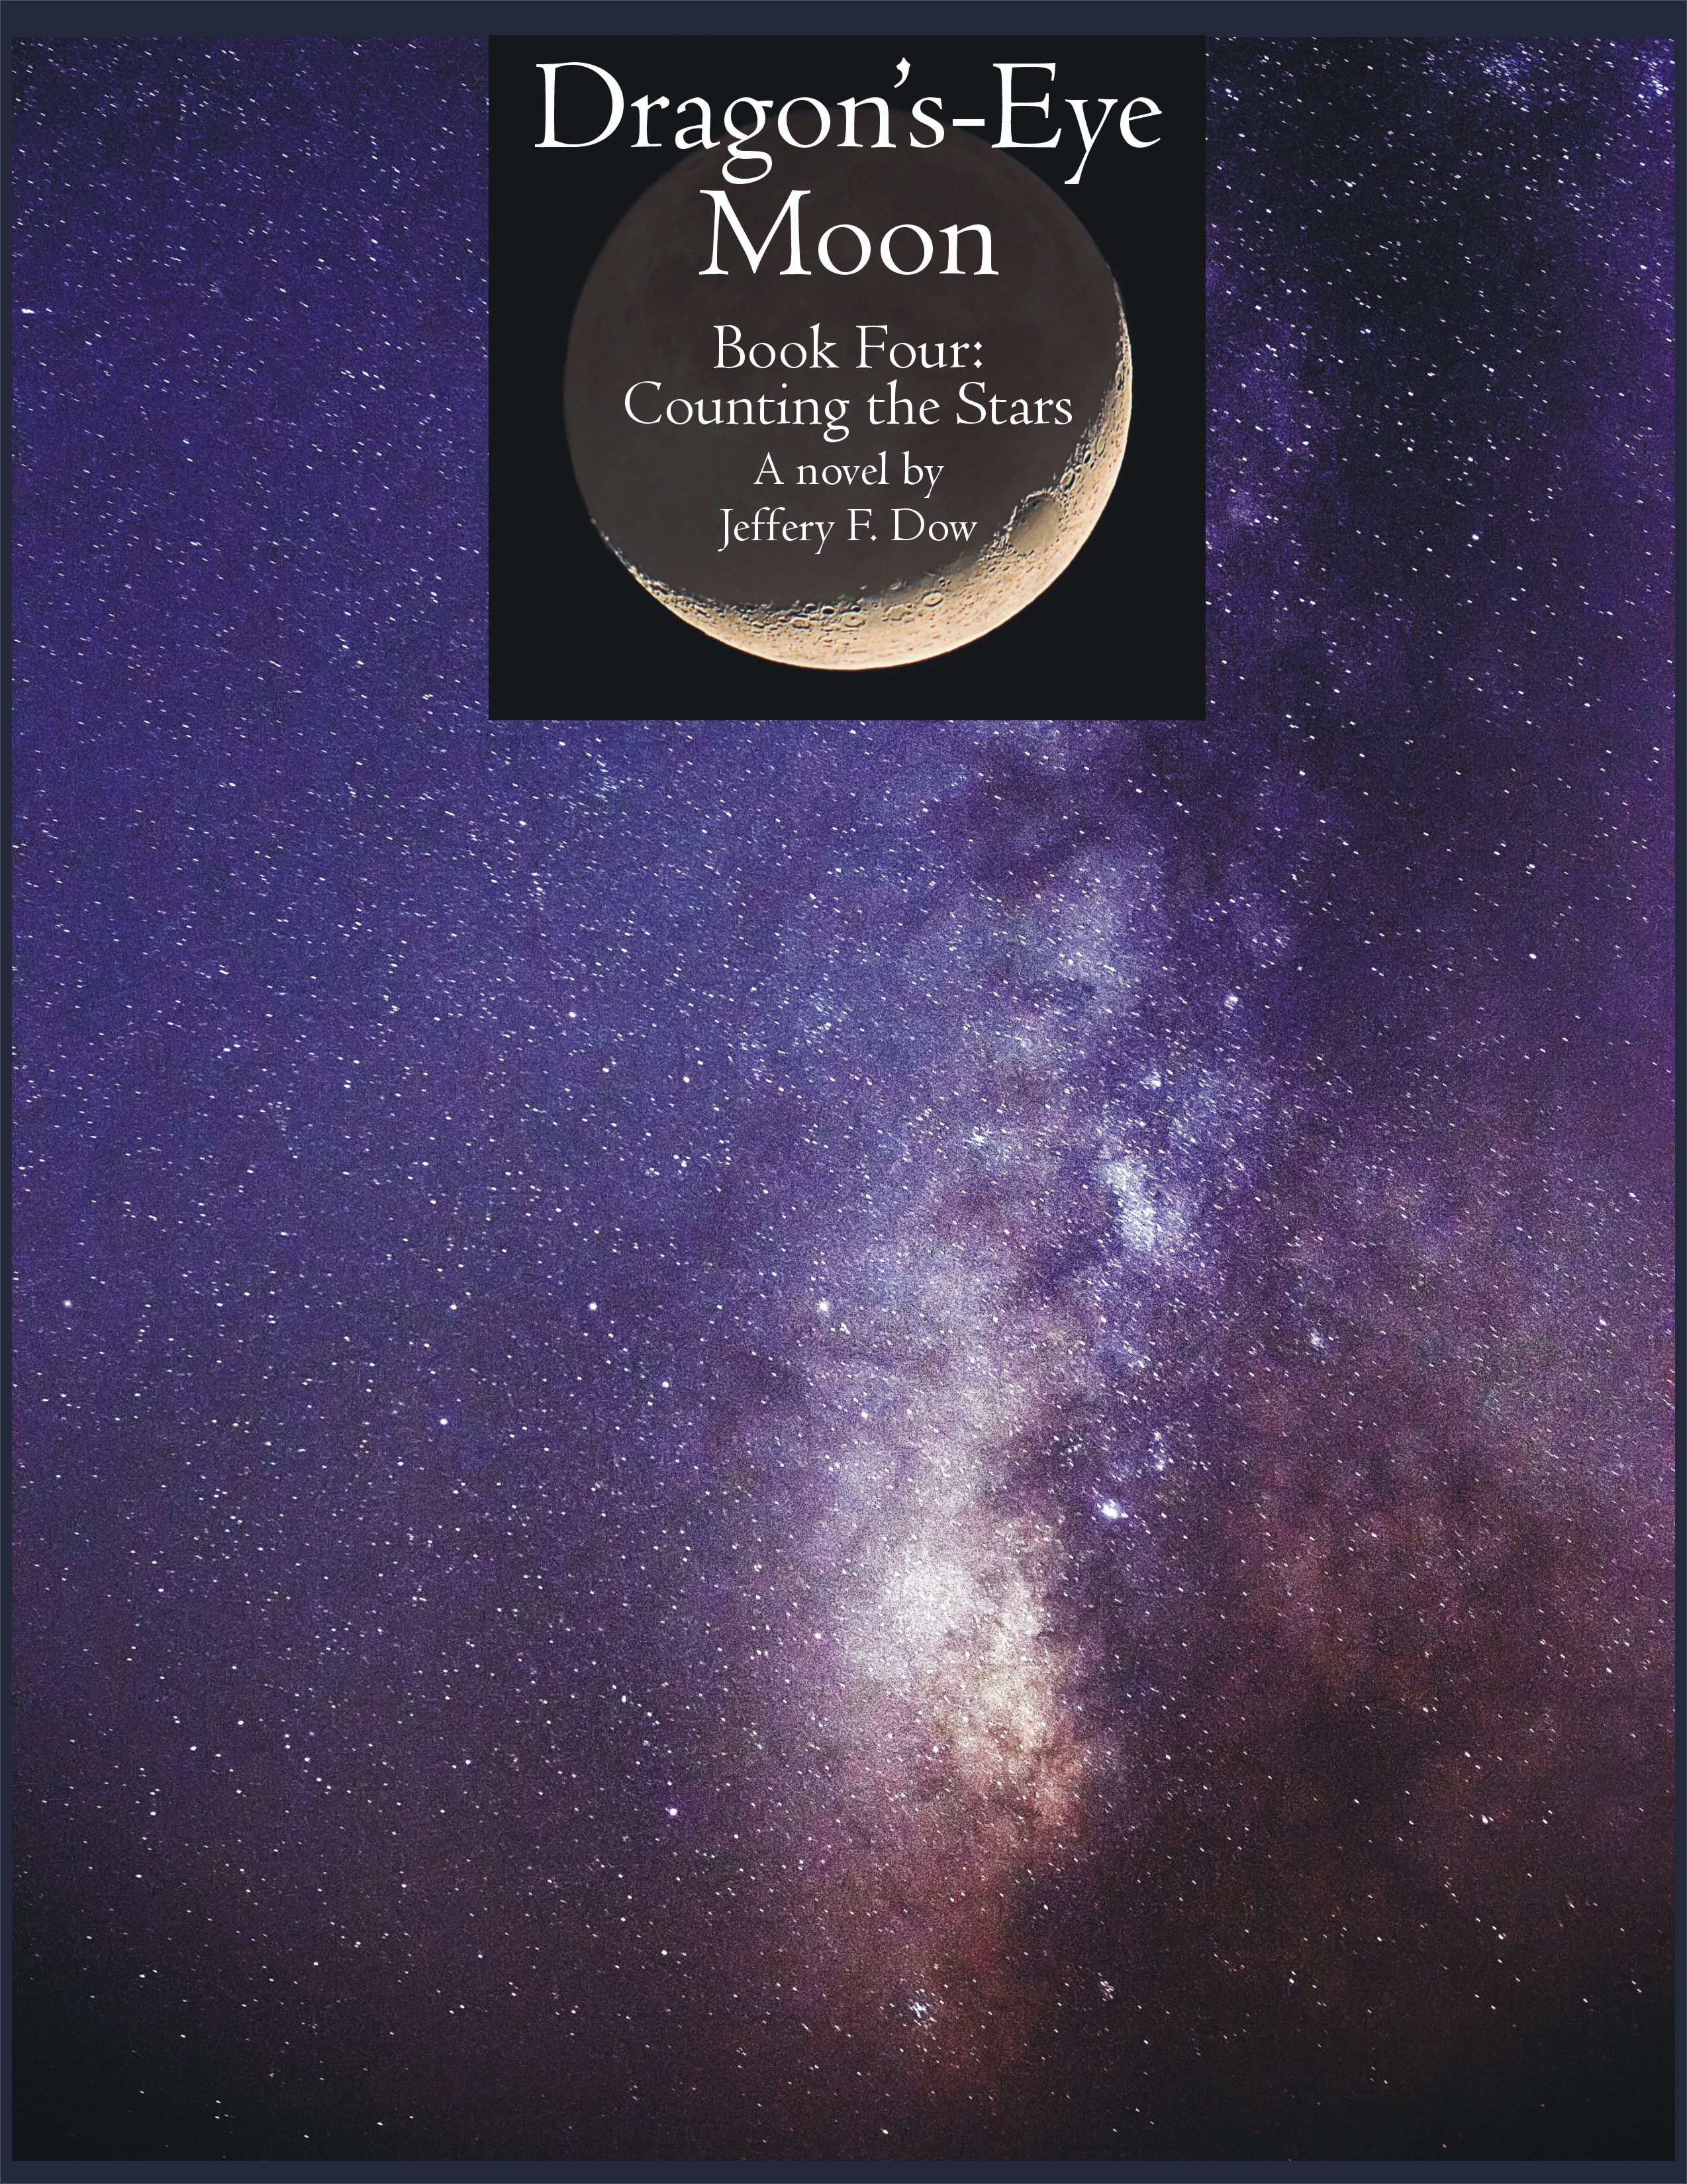 Cover of a book showing a vertical photo of the Milky Way